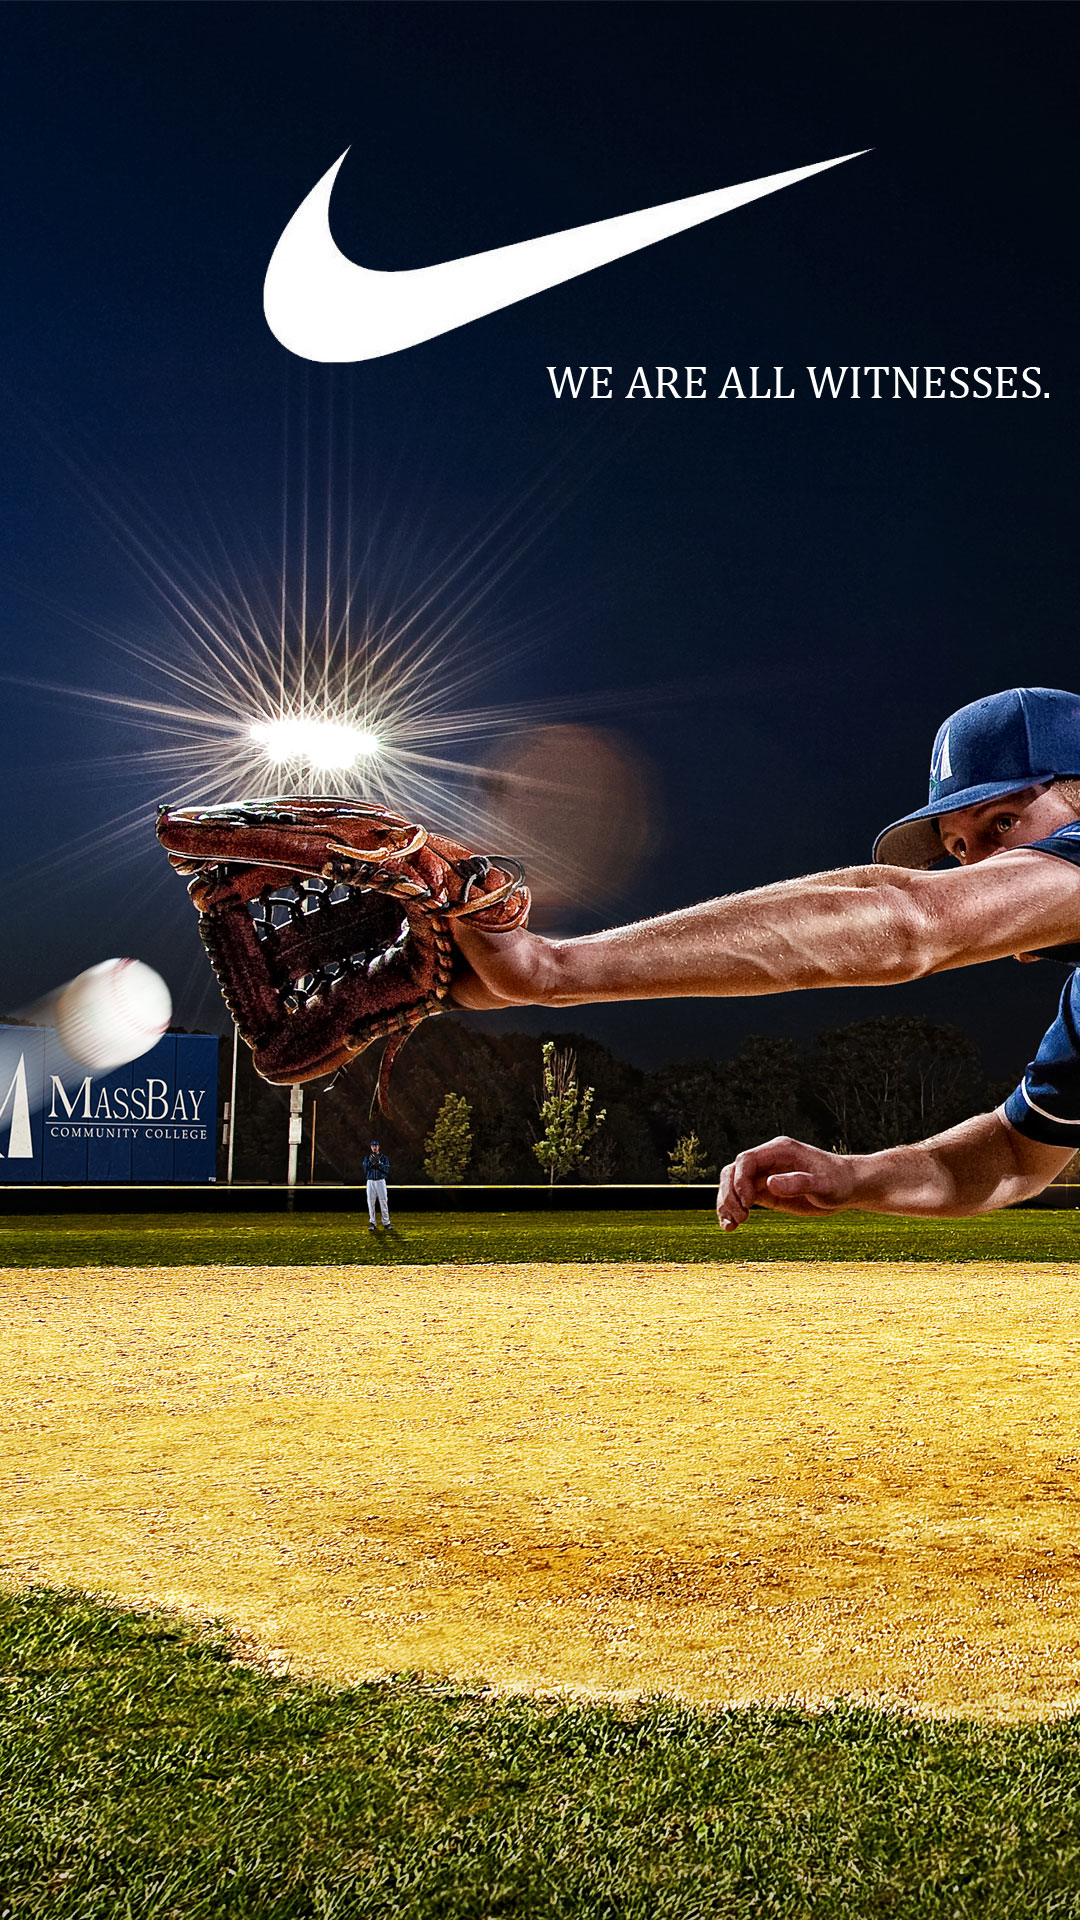 baseball live wallpapers,sport venue,competition event,super bowl,player,sports